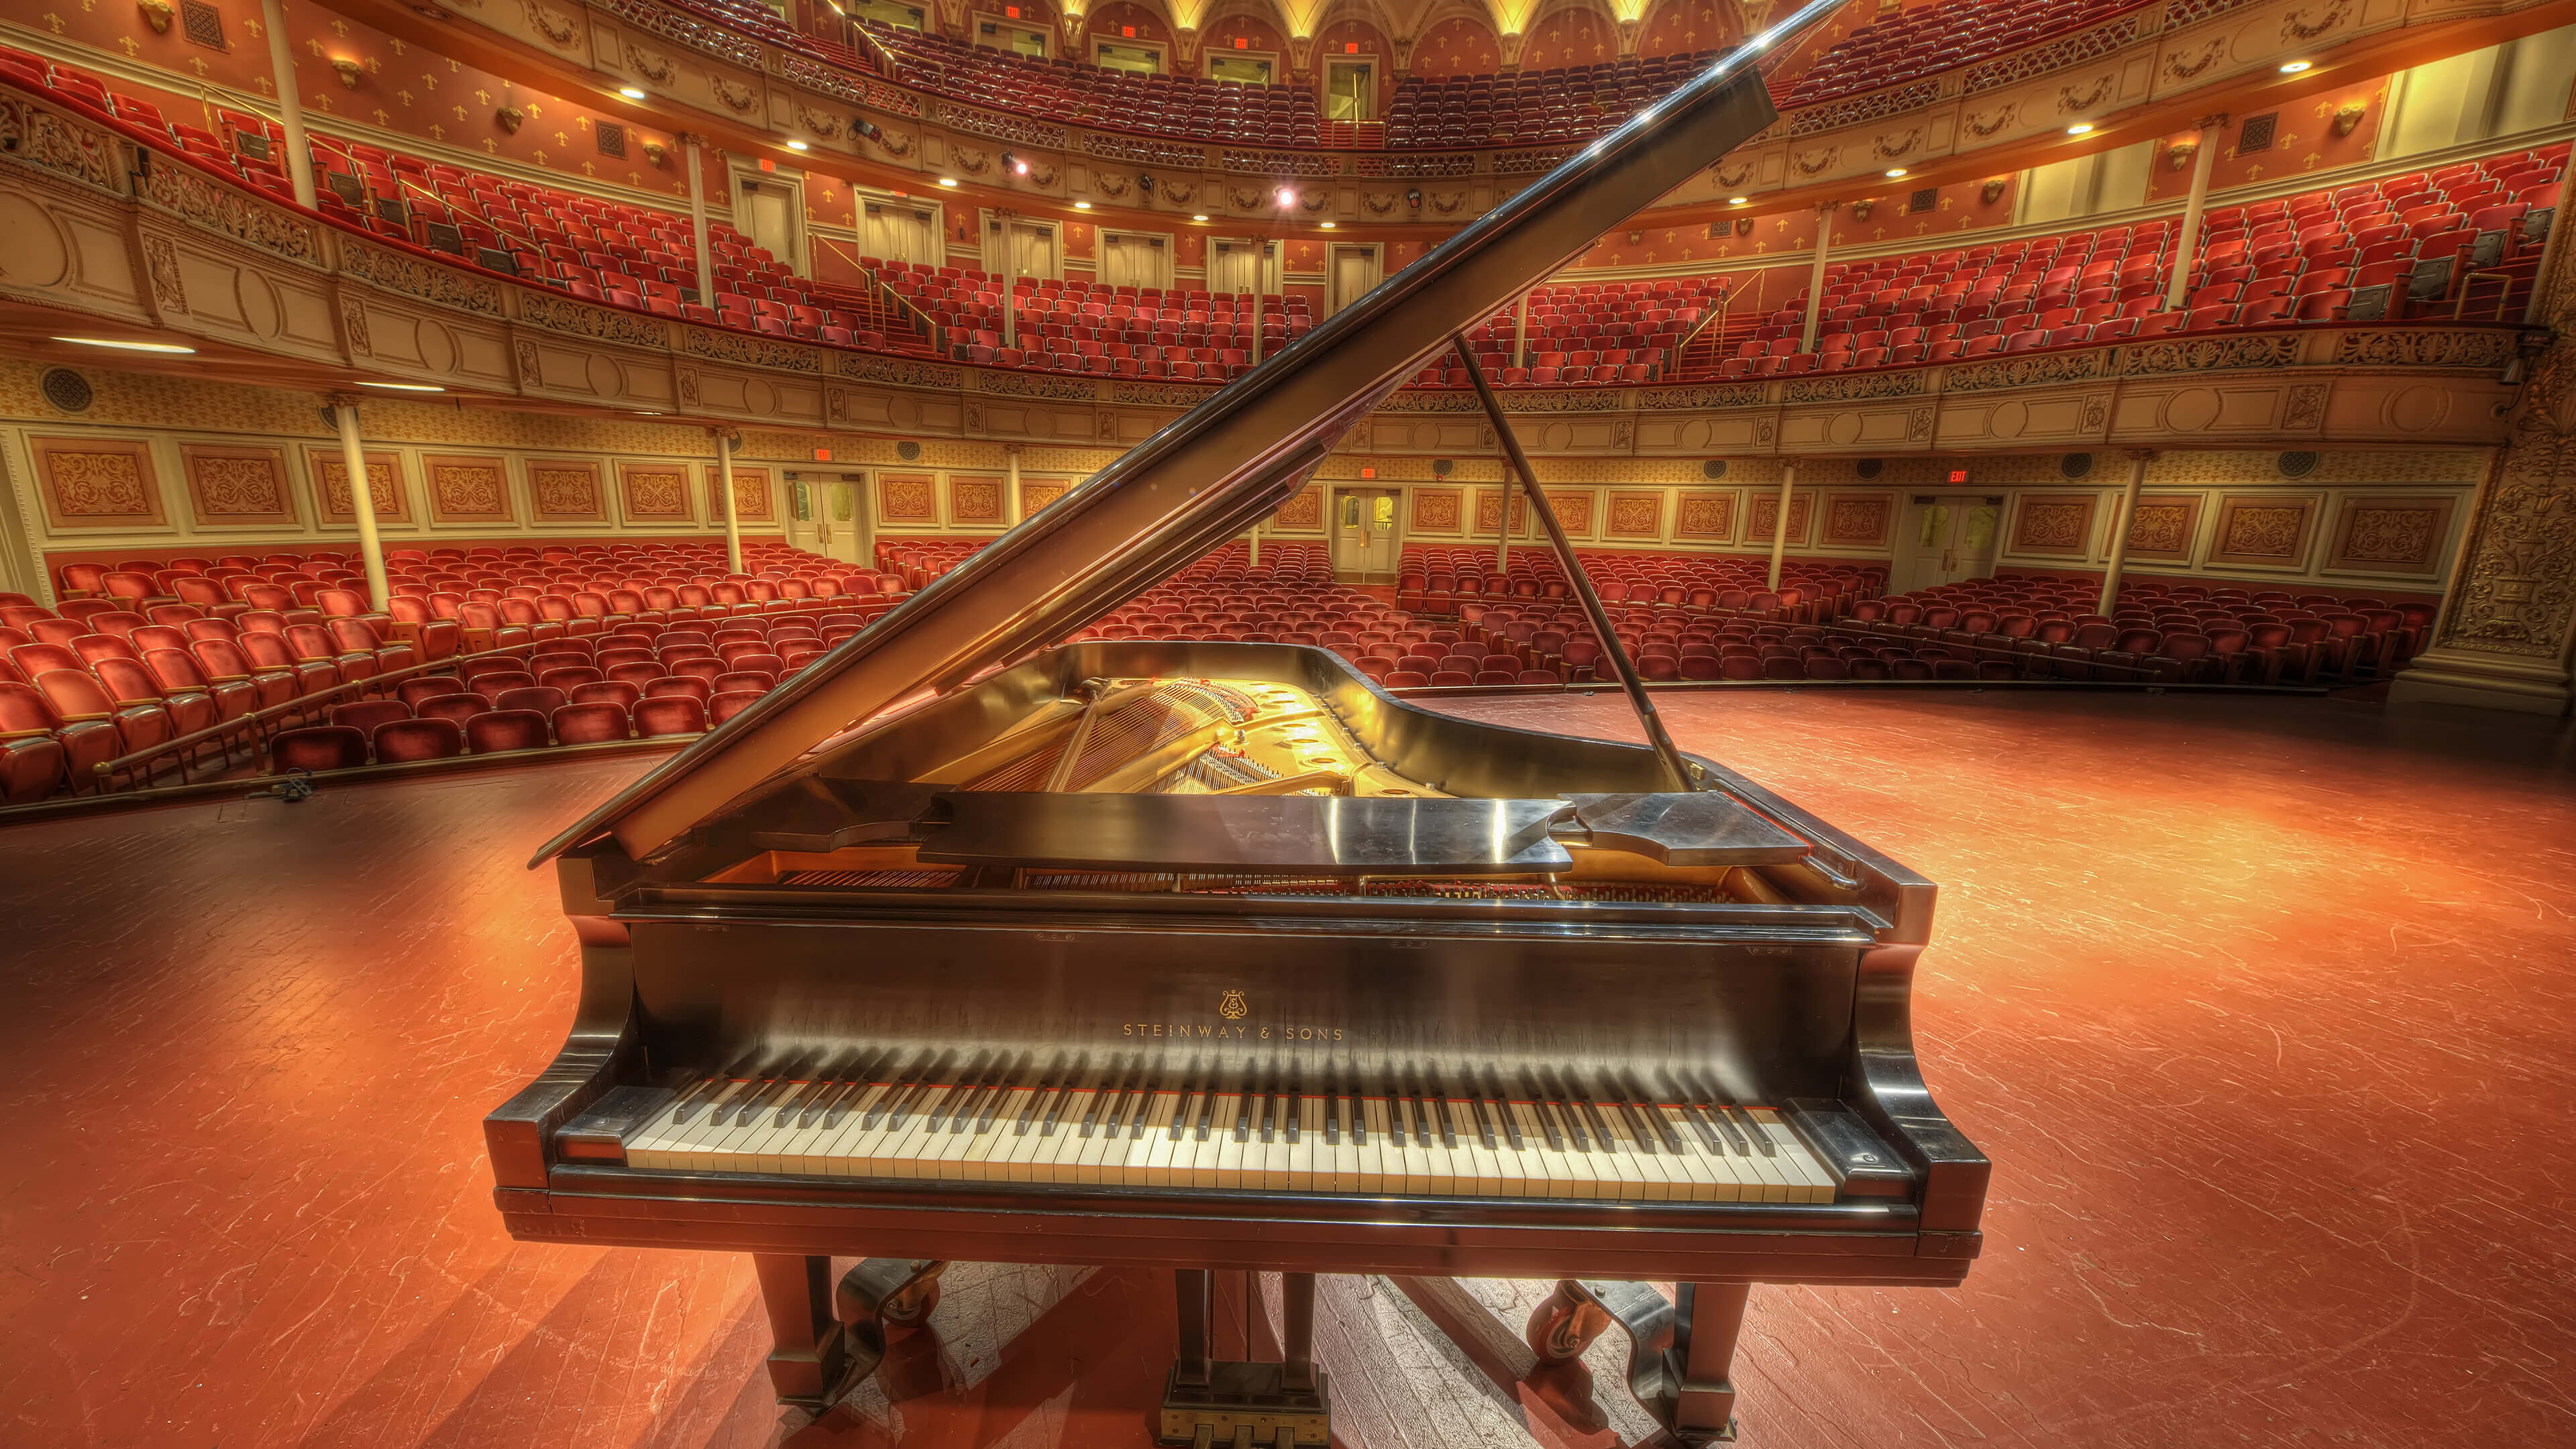 Grand Piano: Music instrument with a row of 88 black and white keys, Concert hall. 3840x2160 4K Wallpaper.